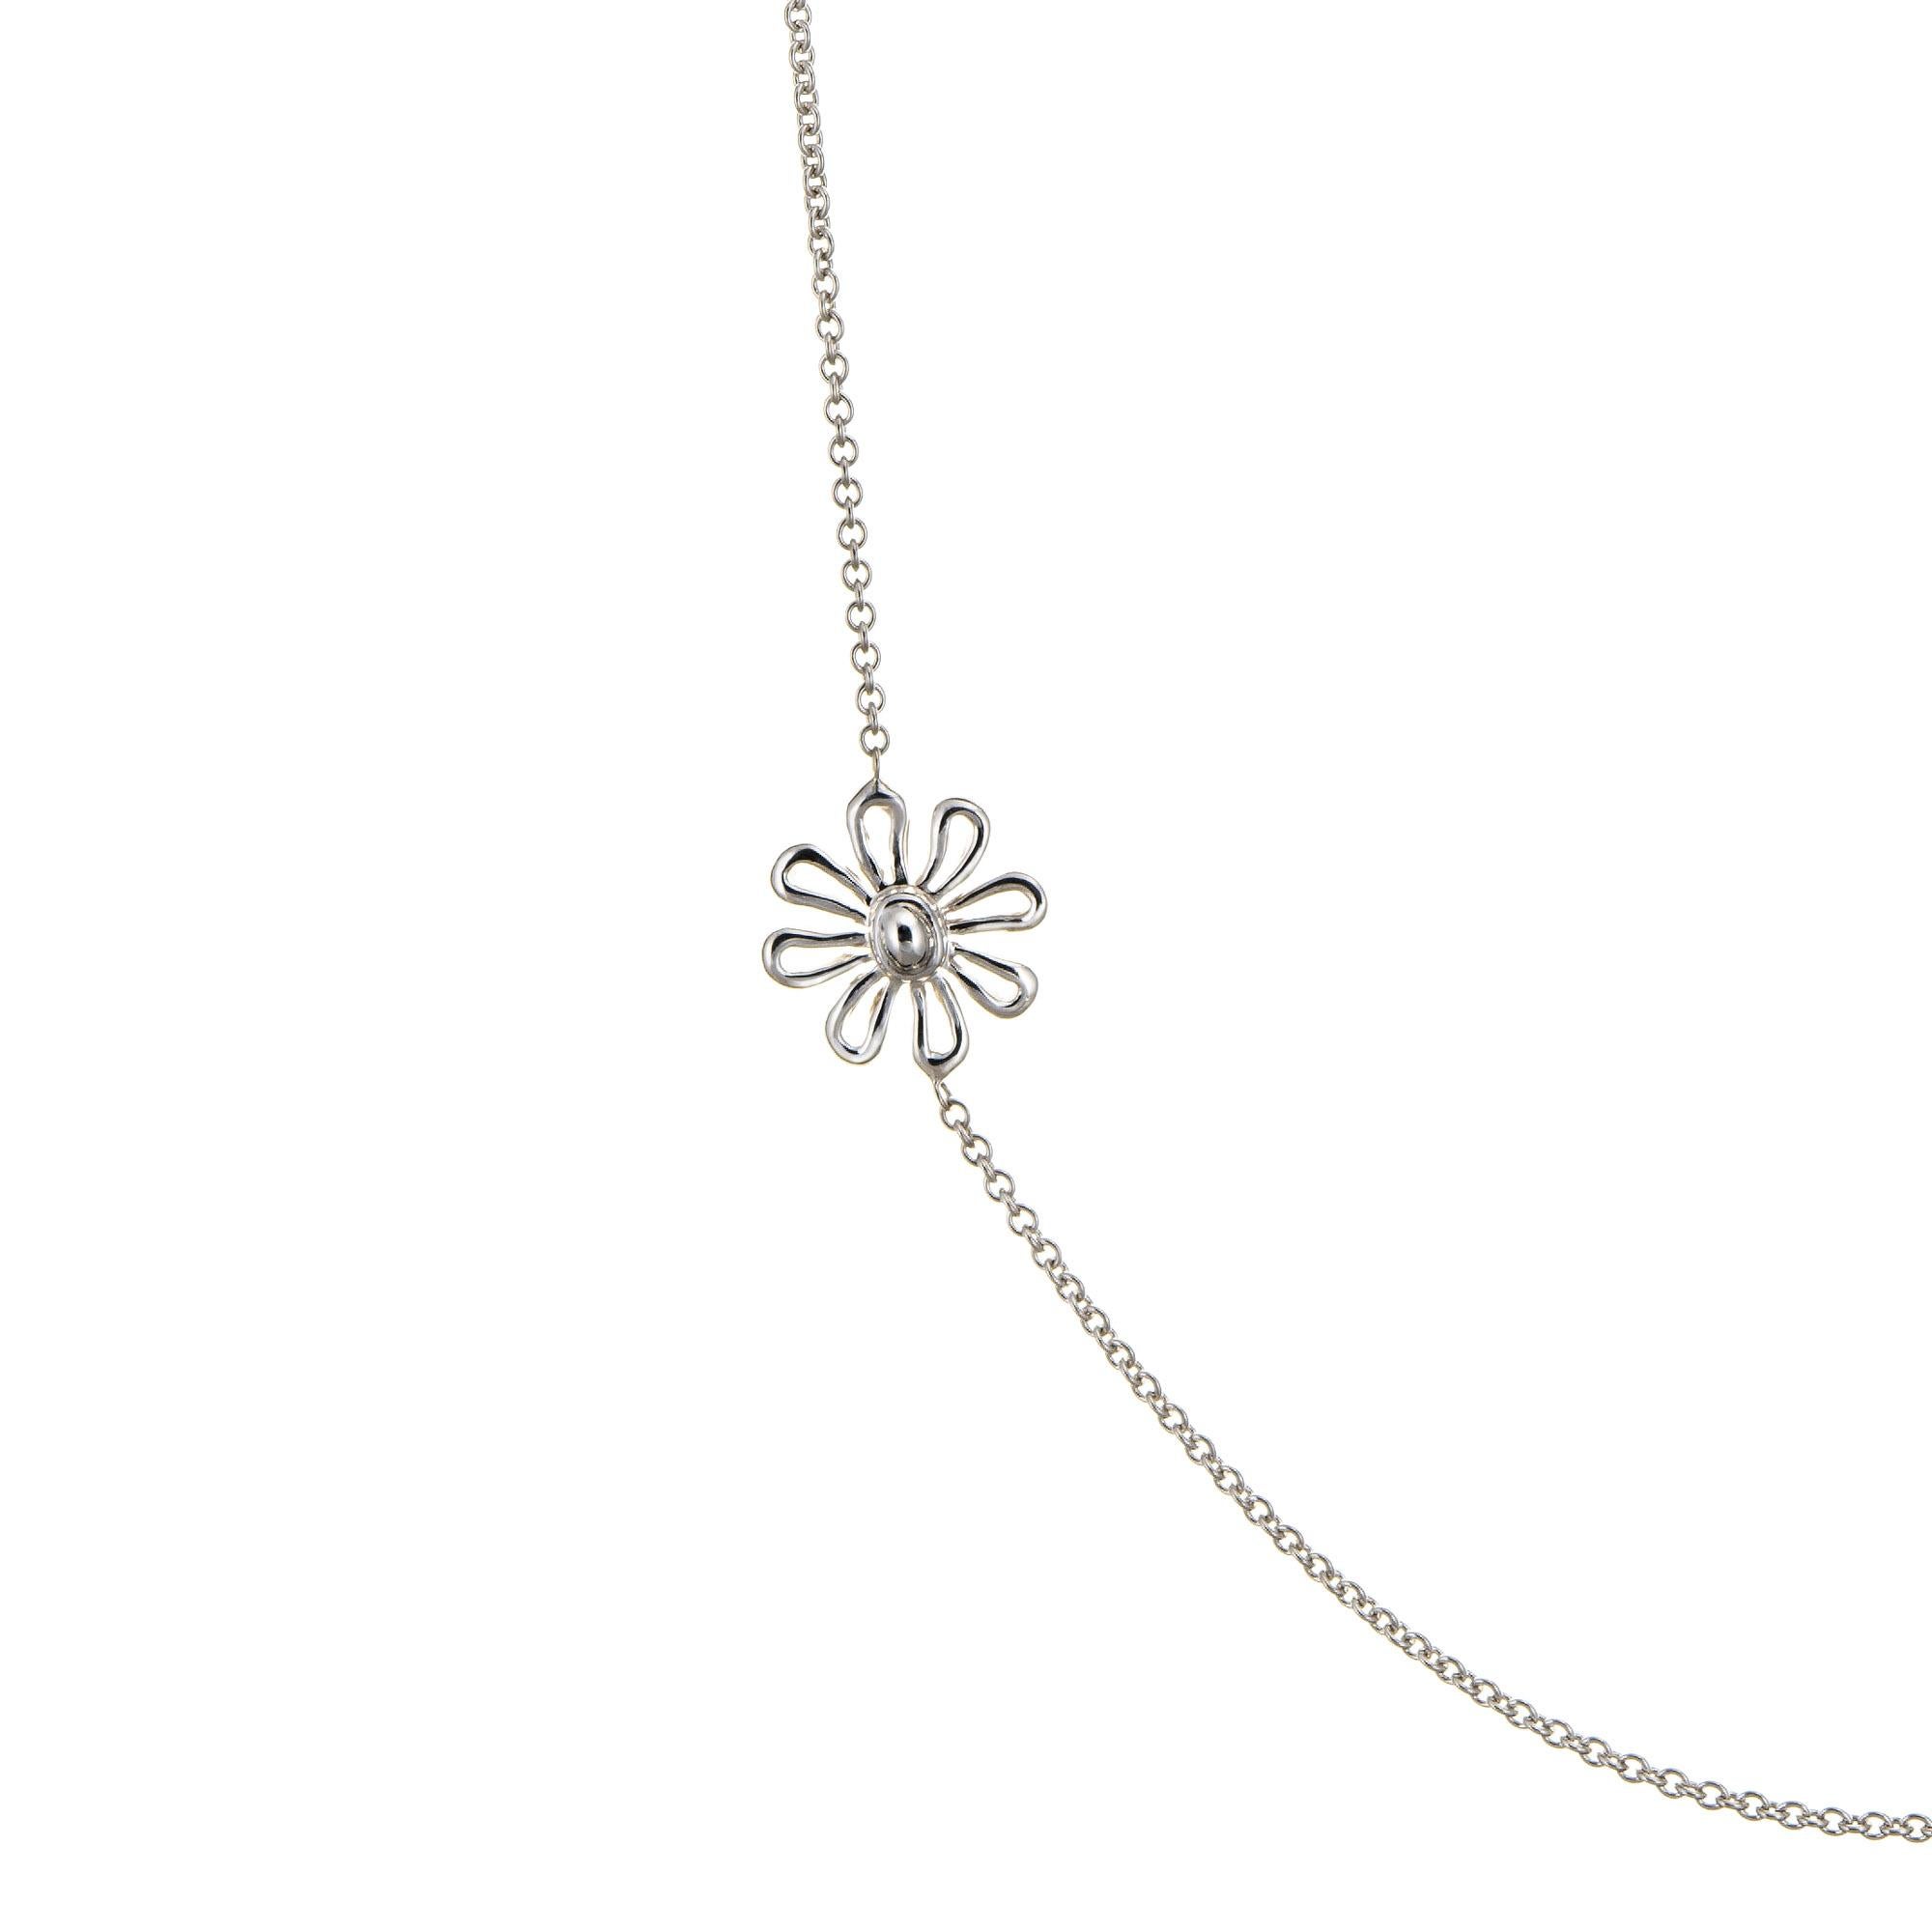 Stylish and finely detailed estate Tiffany & Co flower necklace, crafted in sterling silver.  

The Paloma Picasso designed necklace features five flower stations. Measuring 27 inches in length the long necklace is great worn alone or layered with